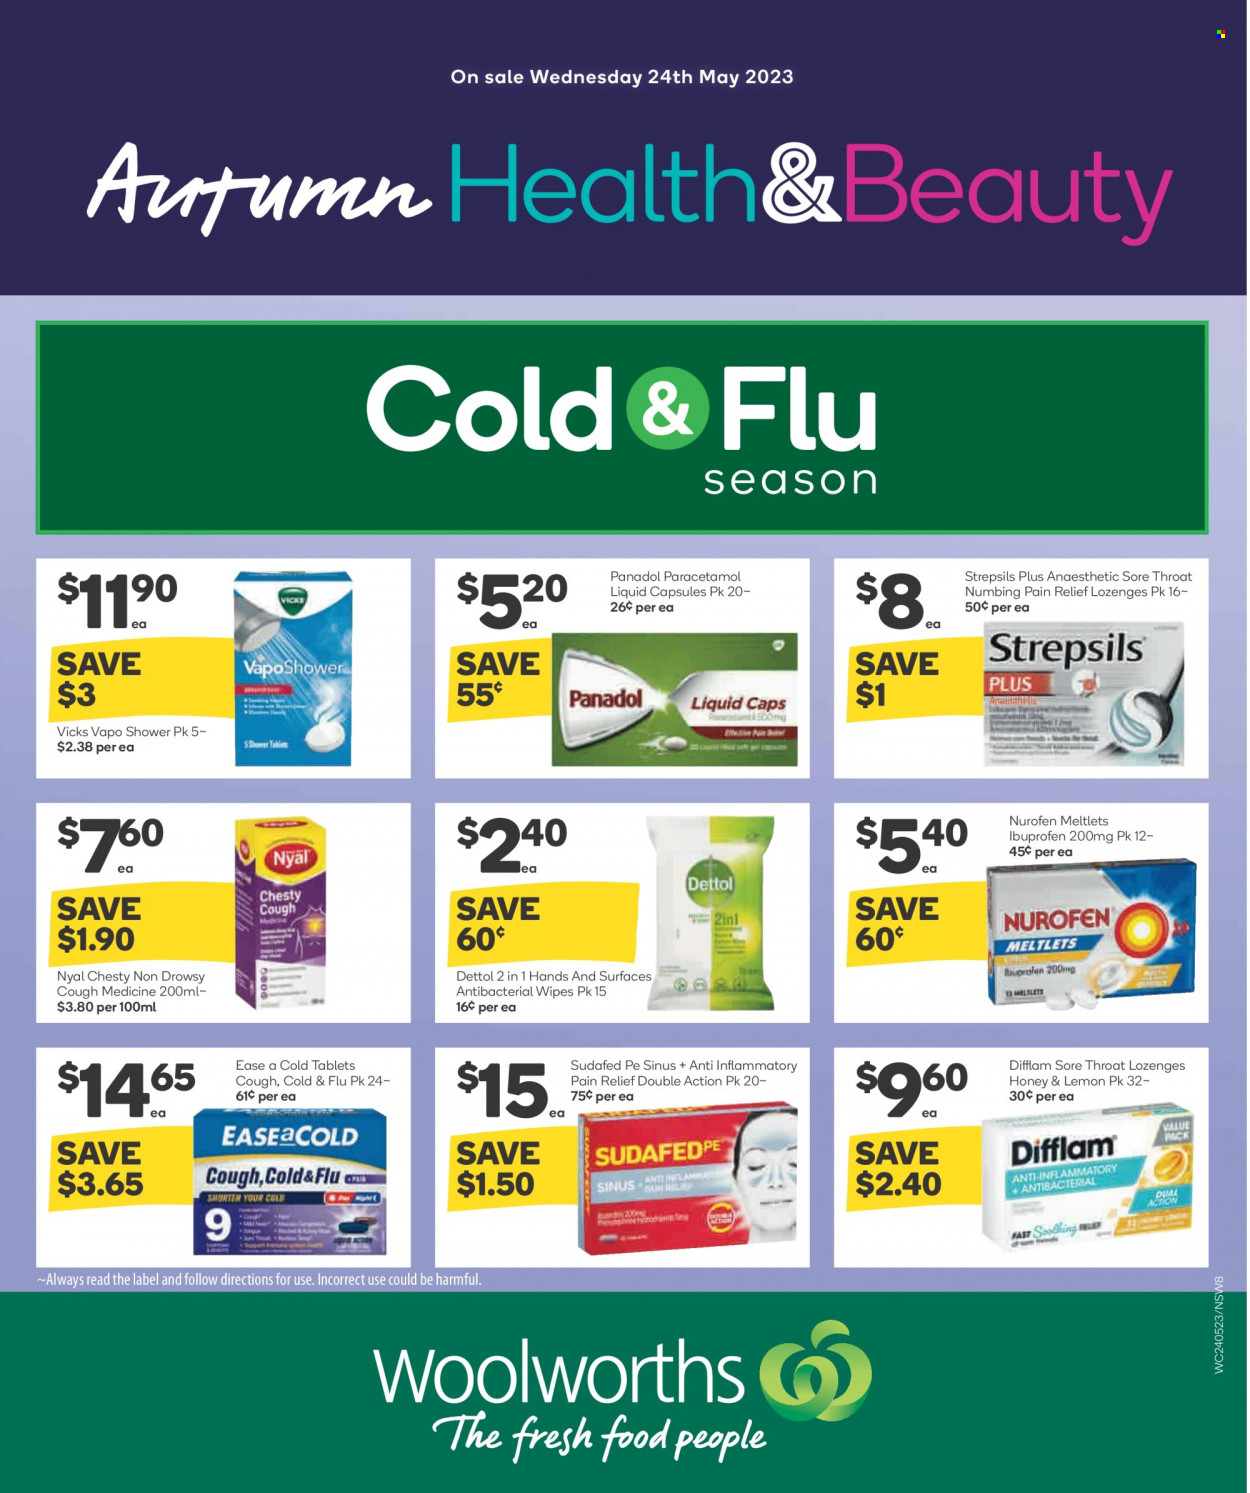 Woolworths Catalogue - 24 May 2023 - 30 May 2023 - Sales products - honey, wipes, Dettol, Vicks, Pain Relief, Cold & Flu, Sudafed, Ibuprofen, Strepsils, Nurofen, Panadol, medicine. Page 2.